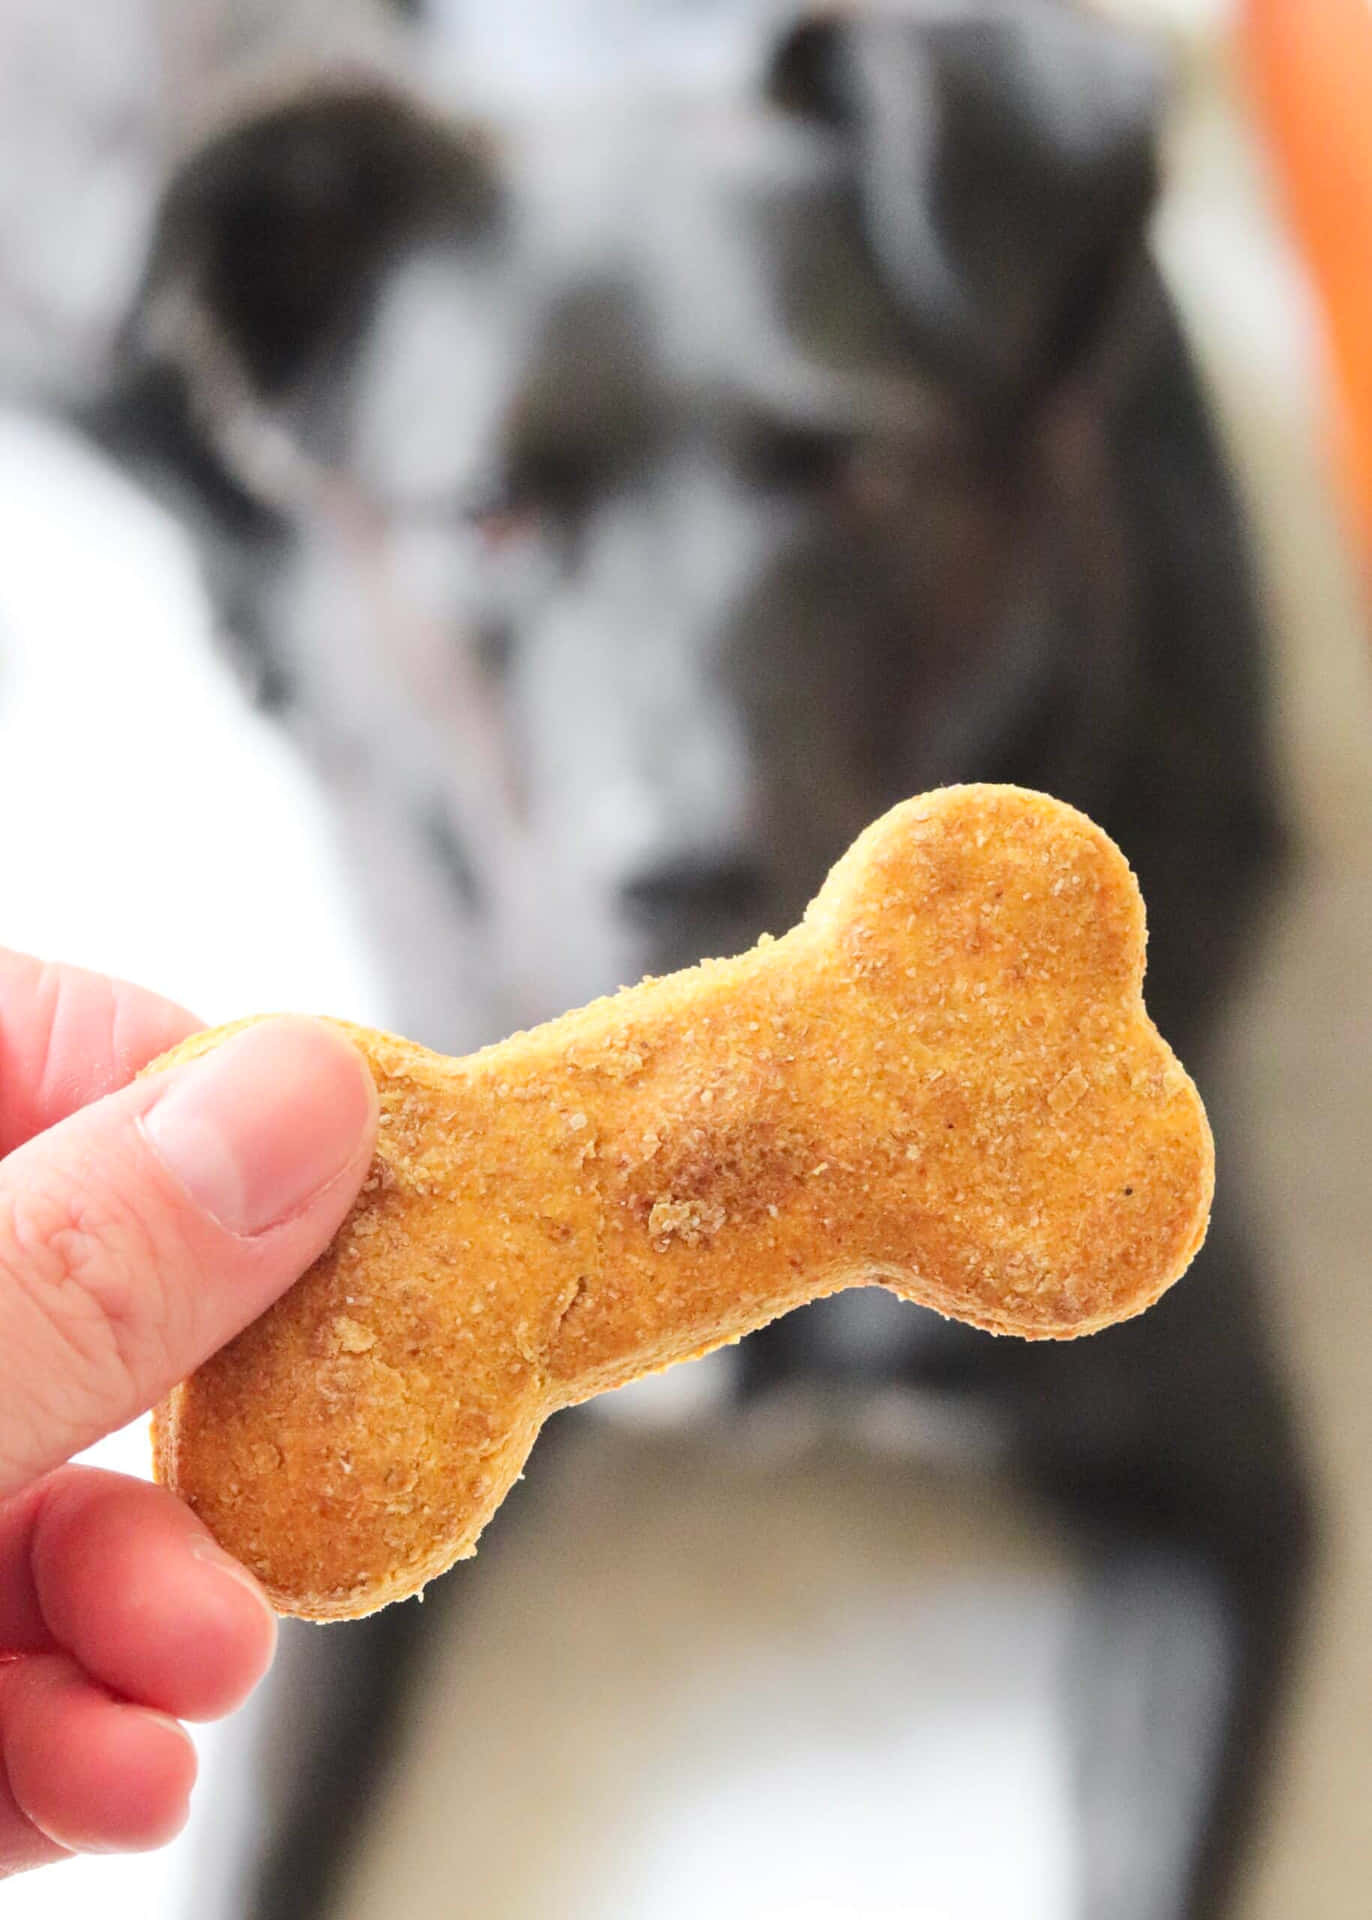 Dog Treat Pictures